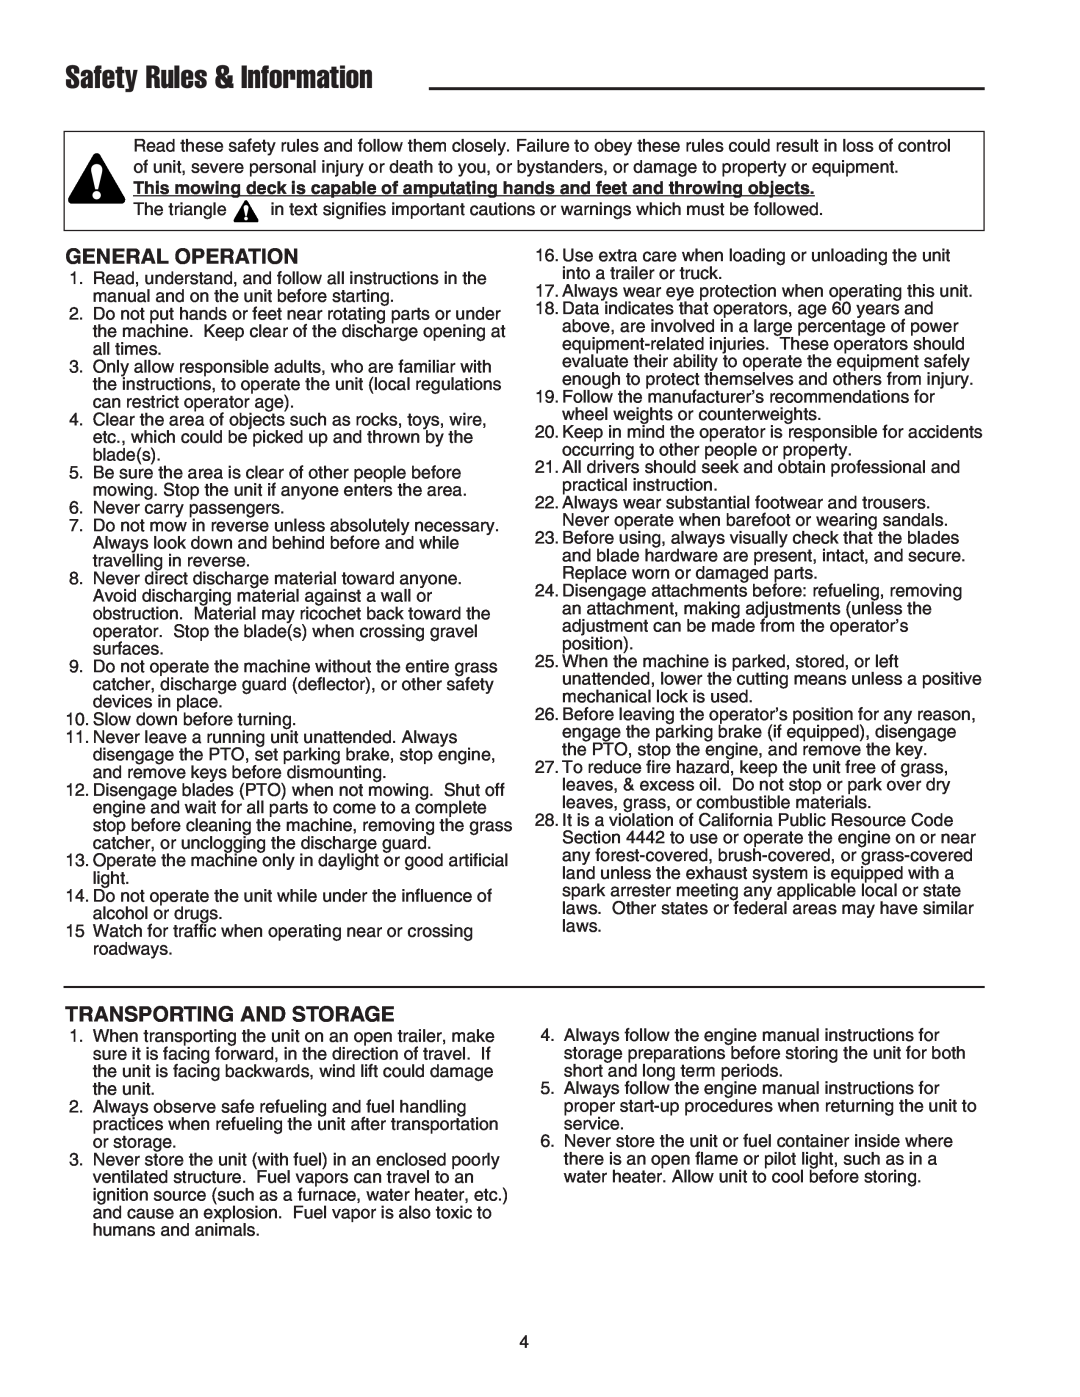 Snapper LT-200 manual Safety Rules & Information, General Operation, Transporting And Storage 